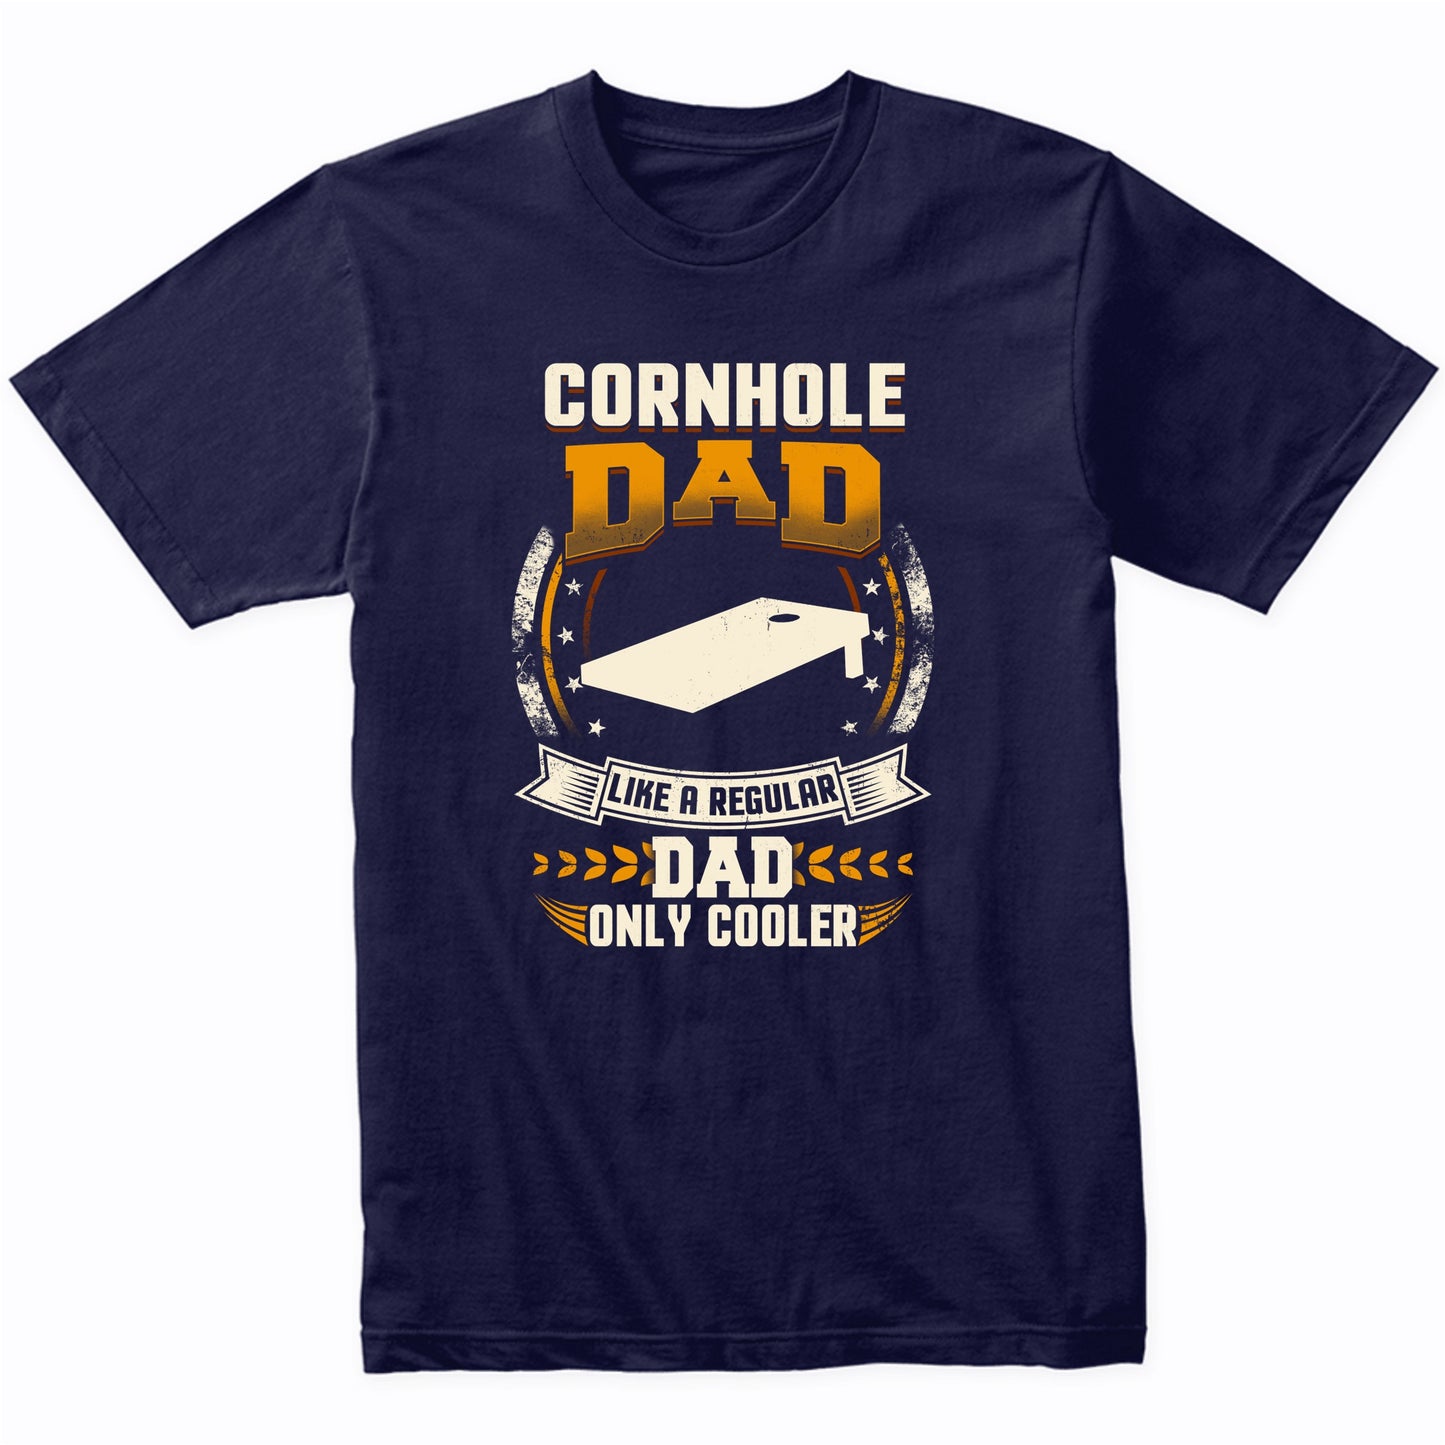 Cornhole Dad Like A Regular Dad Only Cooler Funny T-Shirt